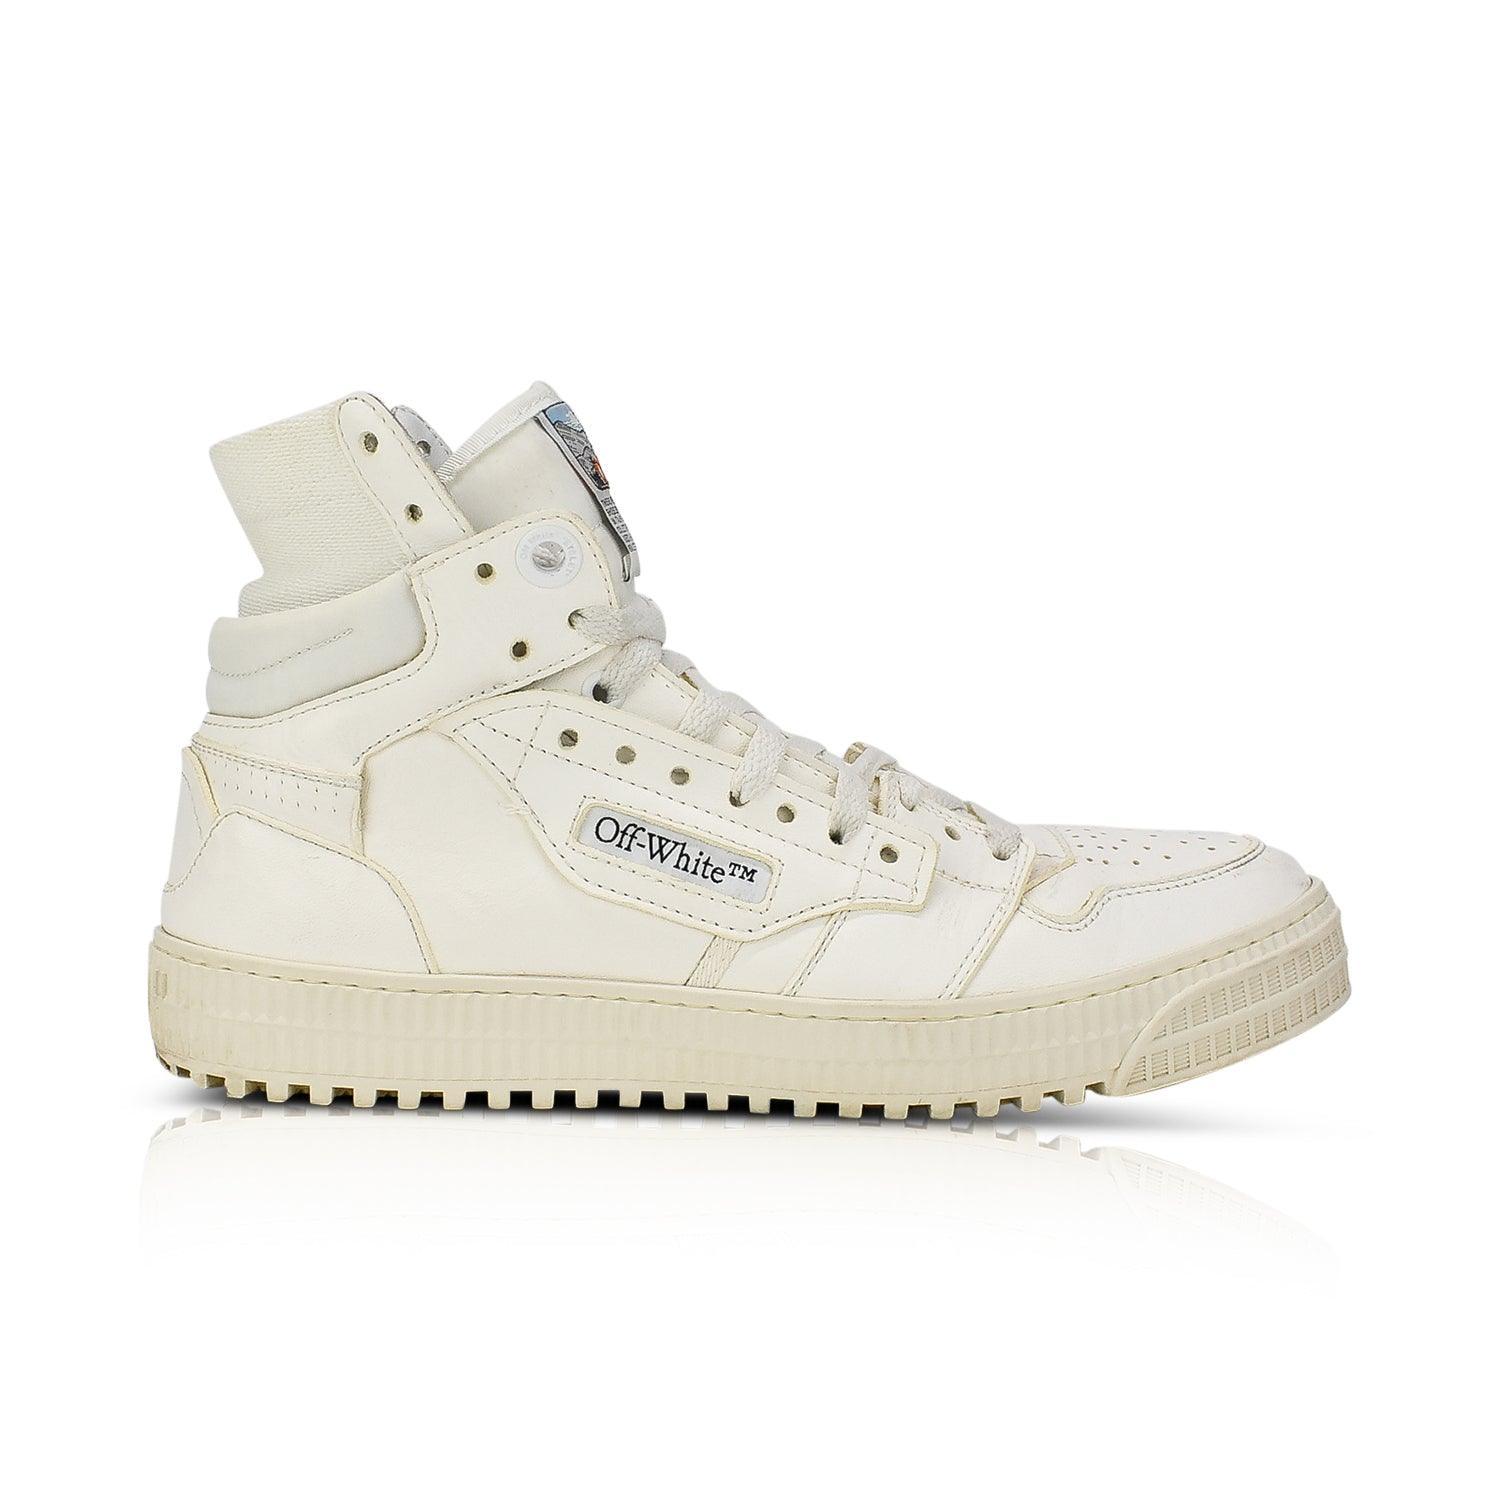 Off-White High-Top Sneakers - Men's 41 - Fashionably Yours